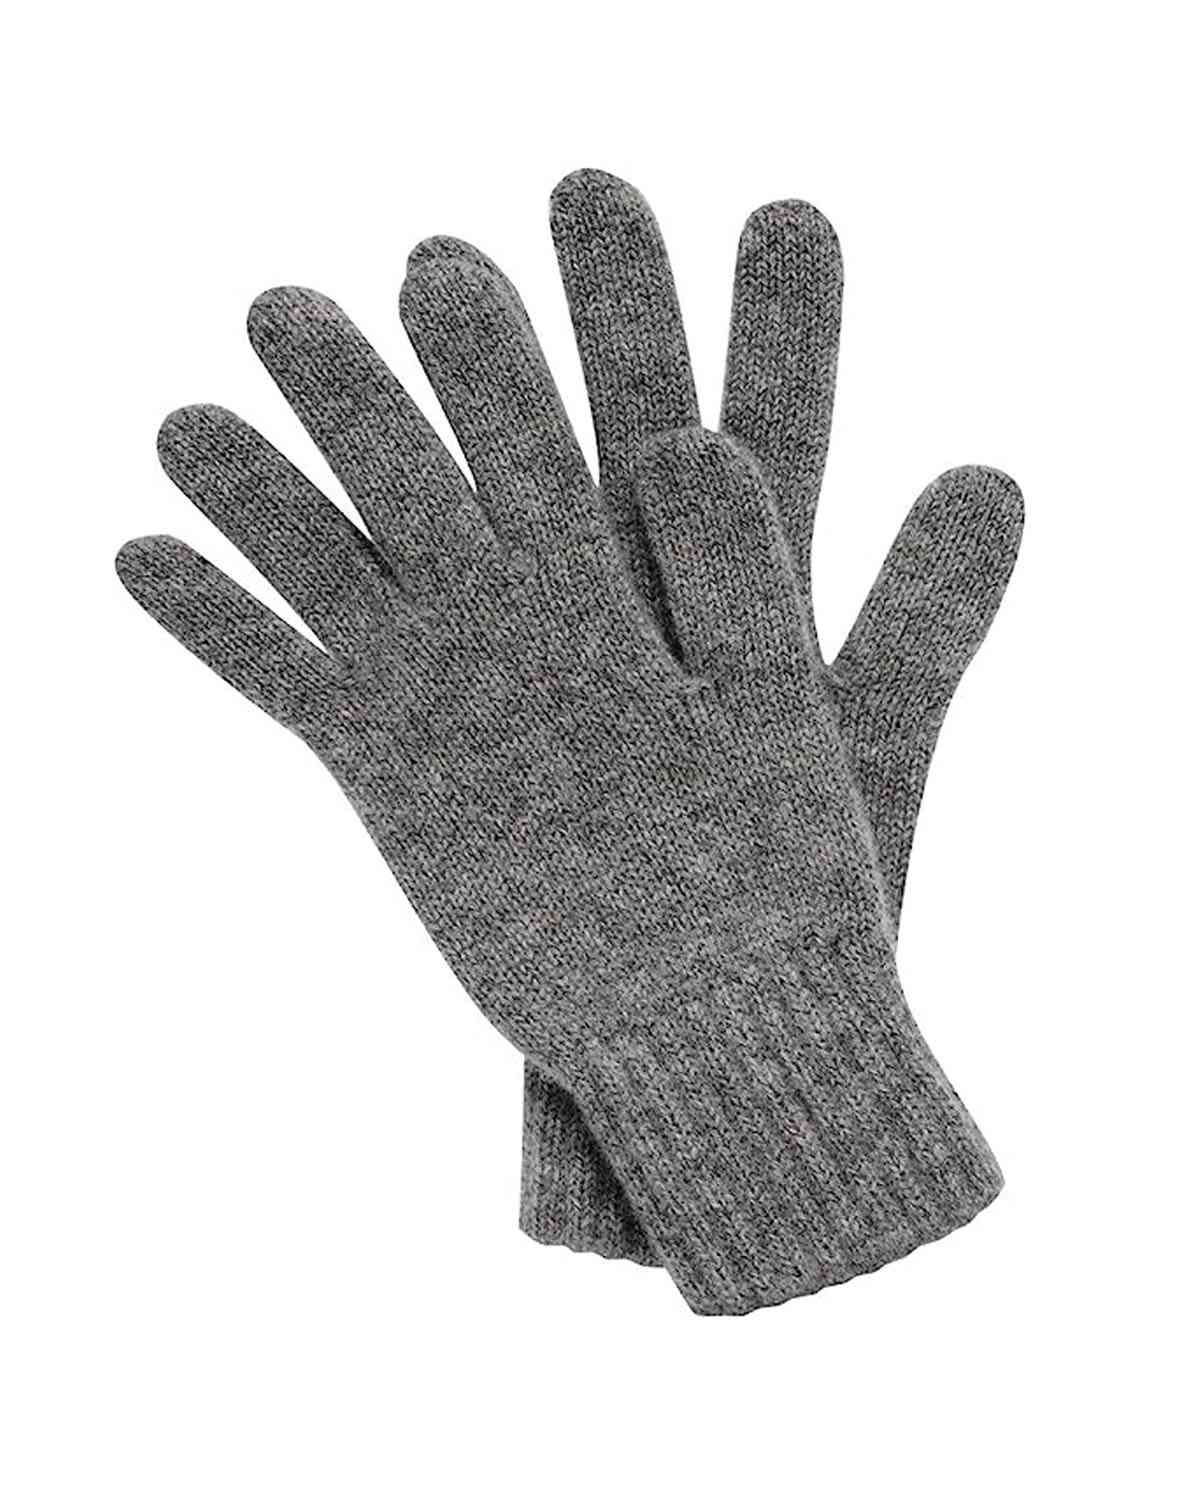 Pure Cashmere Gloves. Made in Nepal